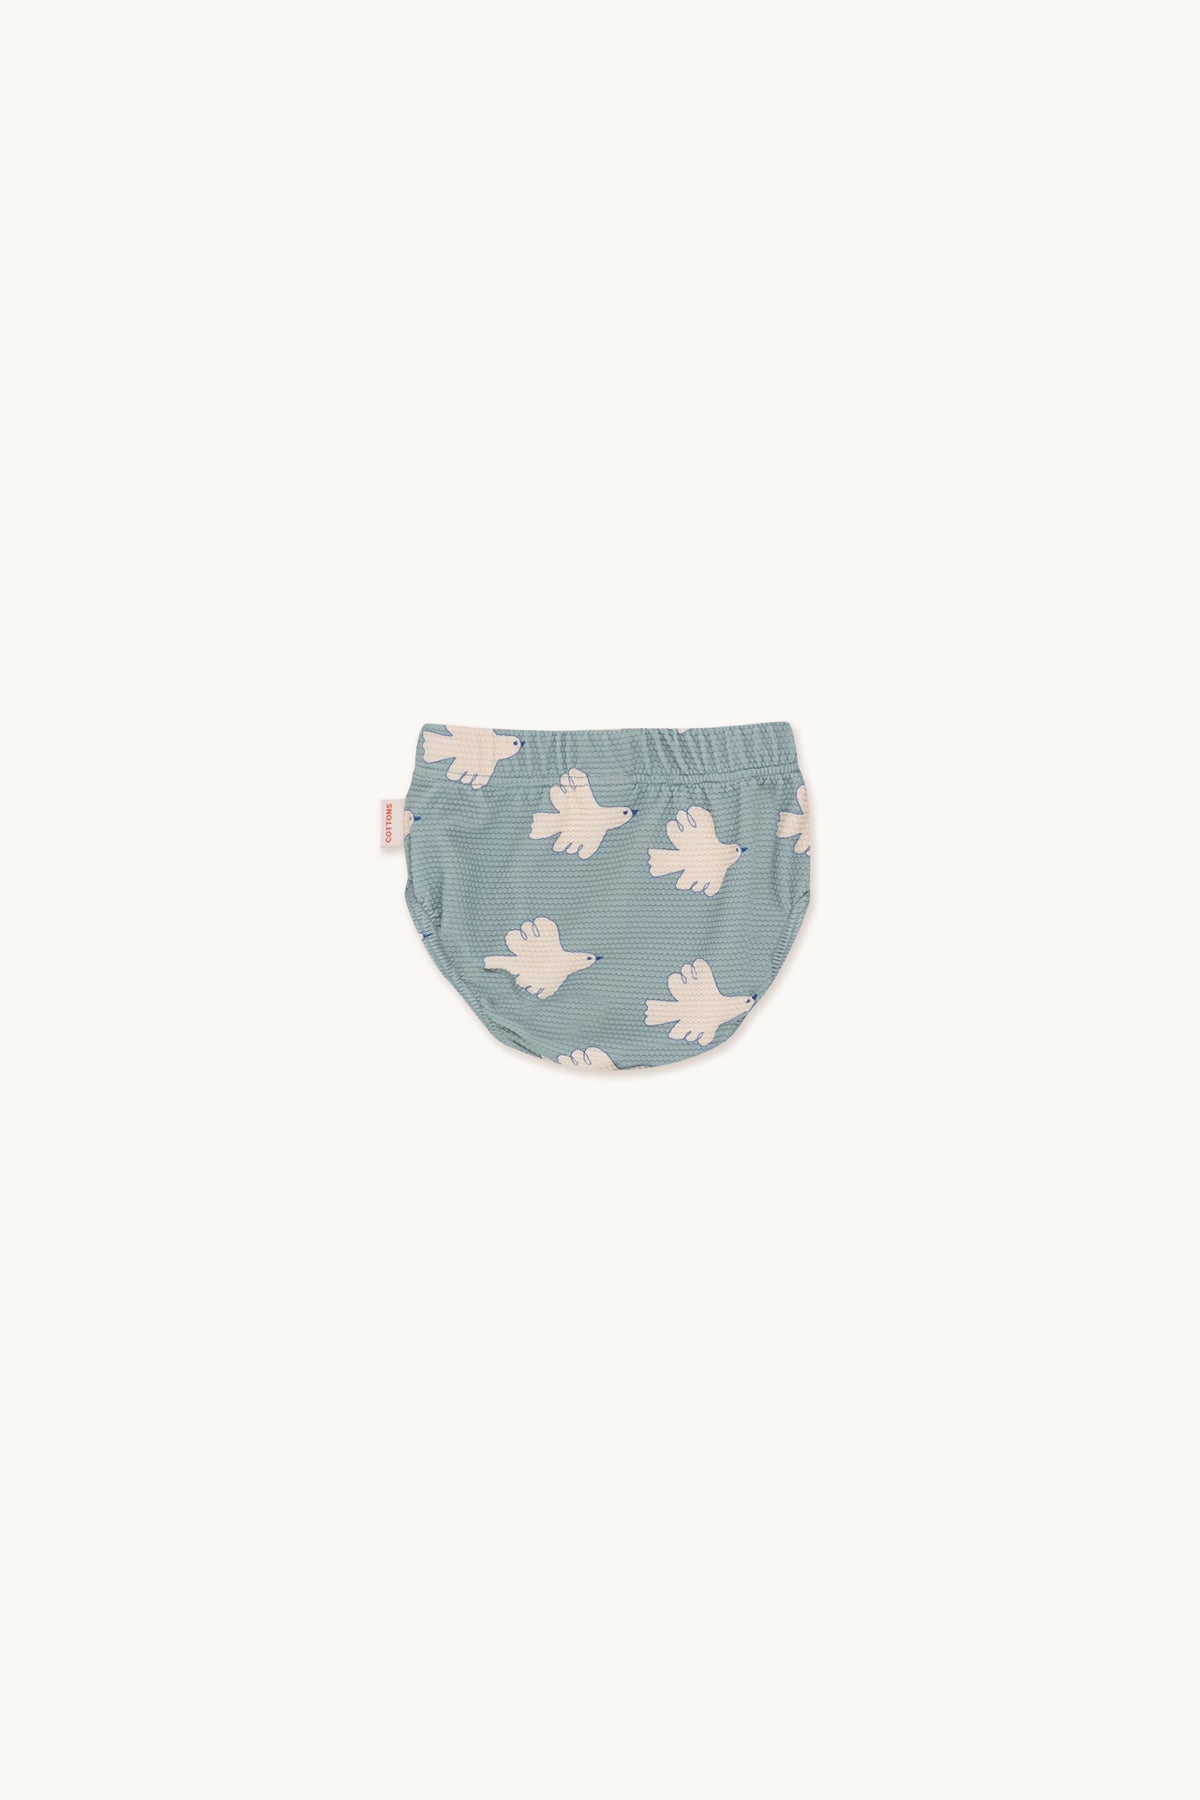 Tiny Cottons - baby swim bloomers - doves - warm grey